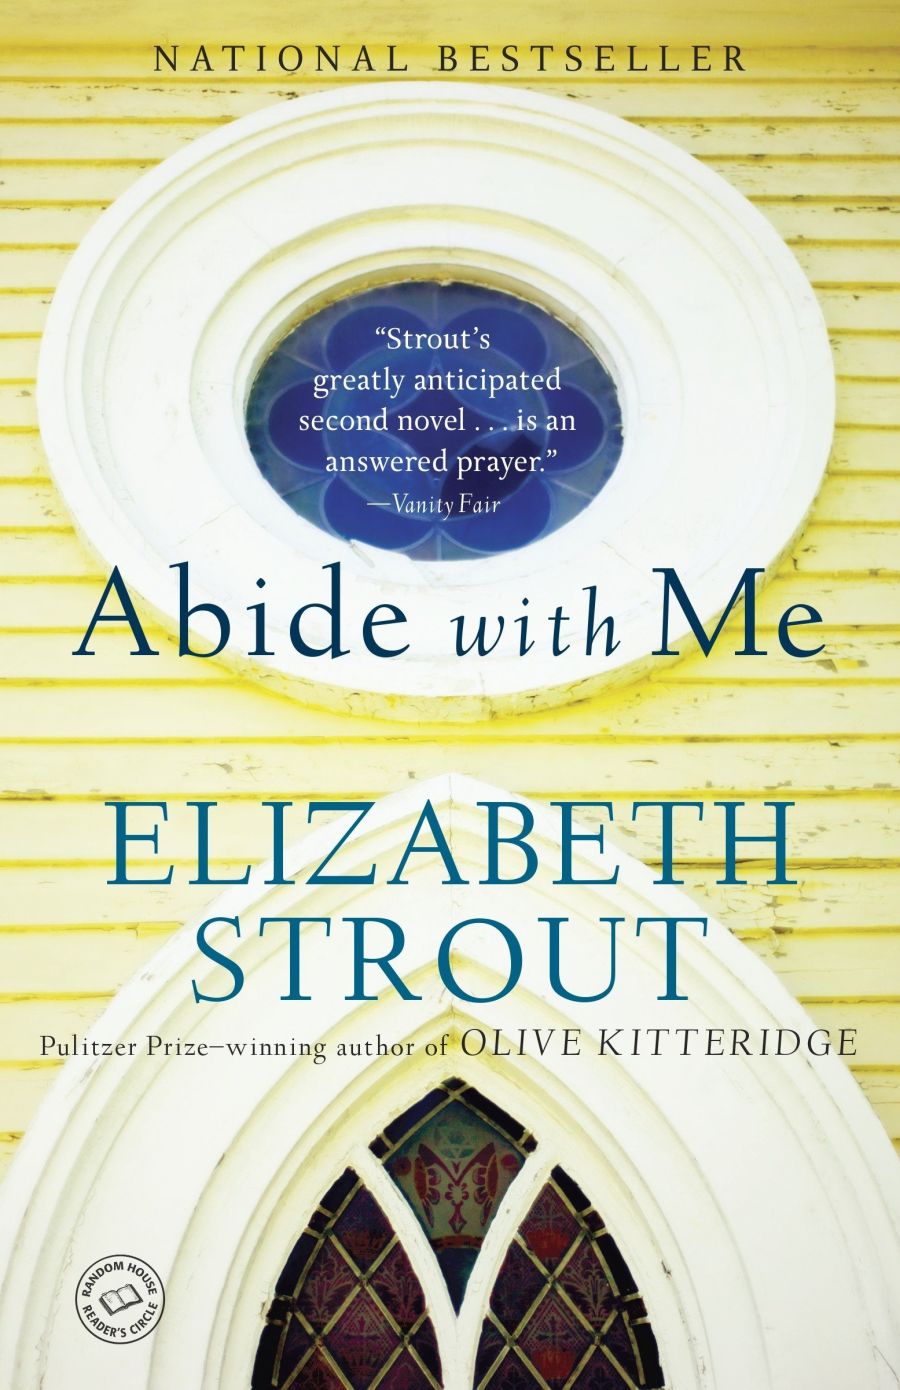 book cover of Abide with Me, by Elizabeth Strout.